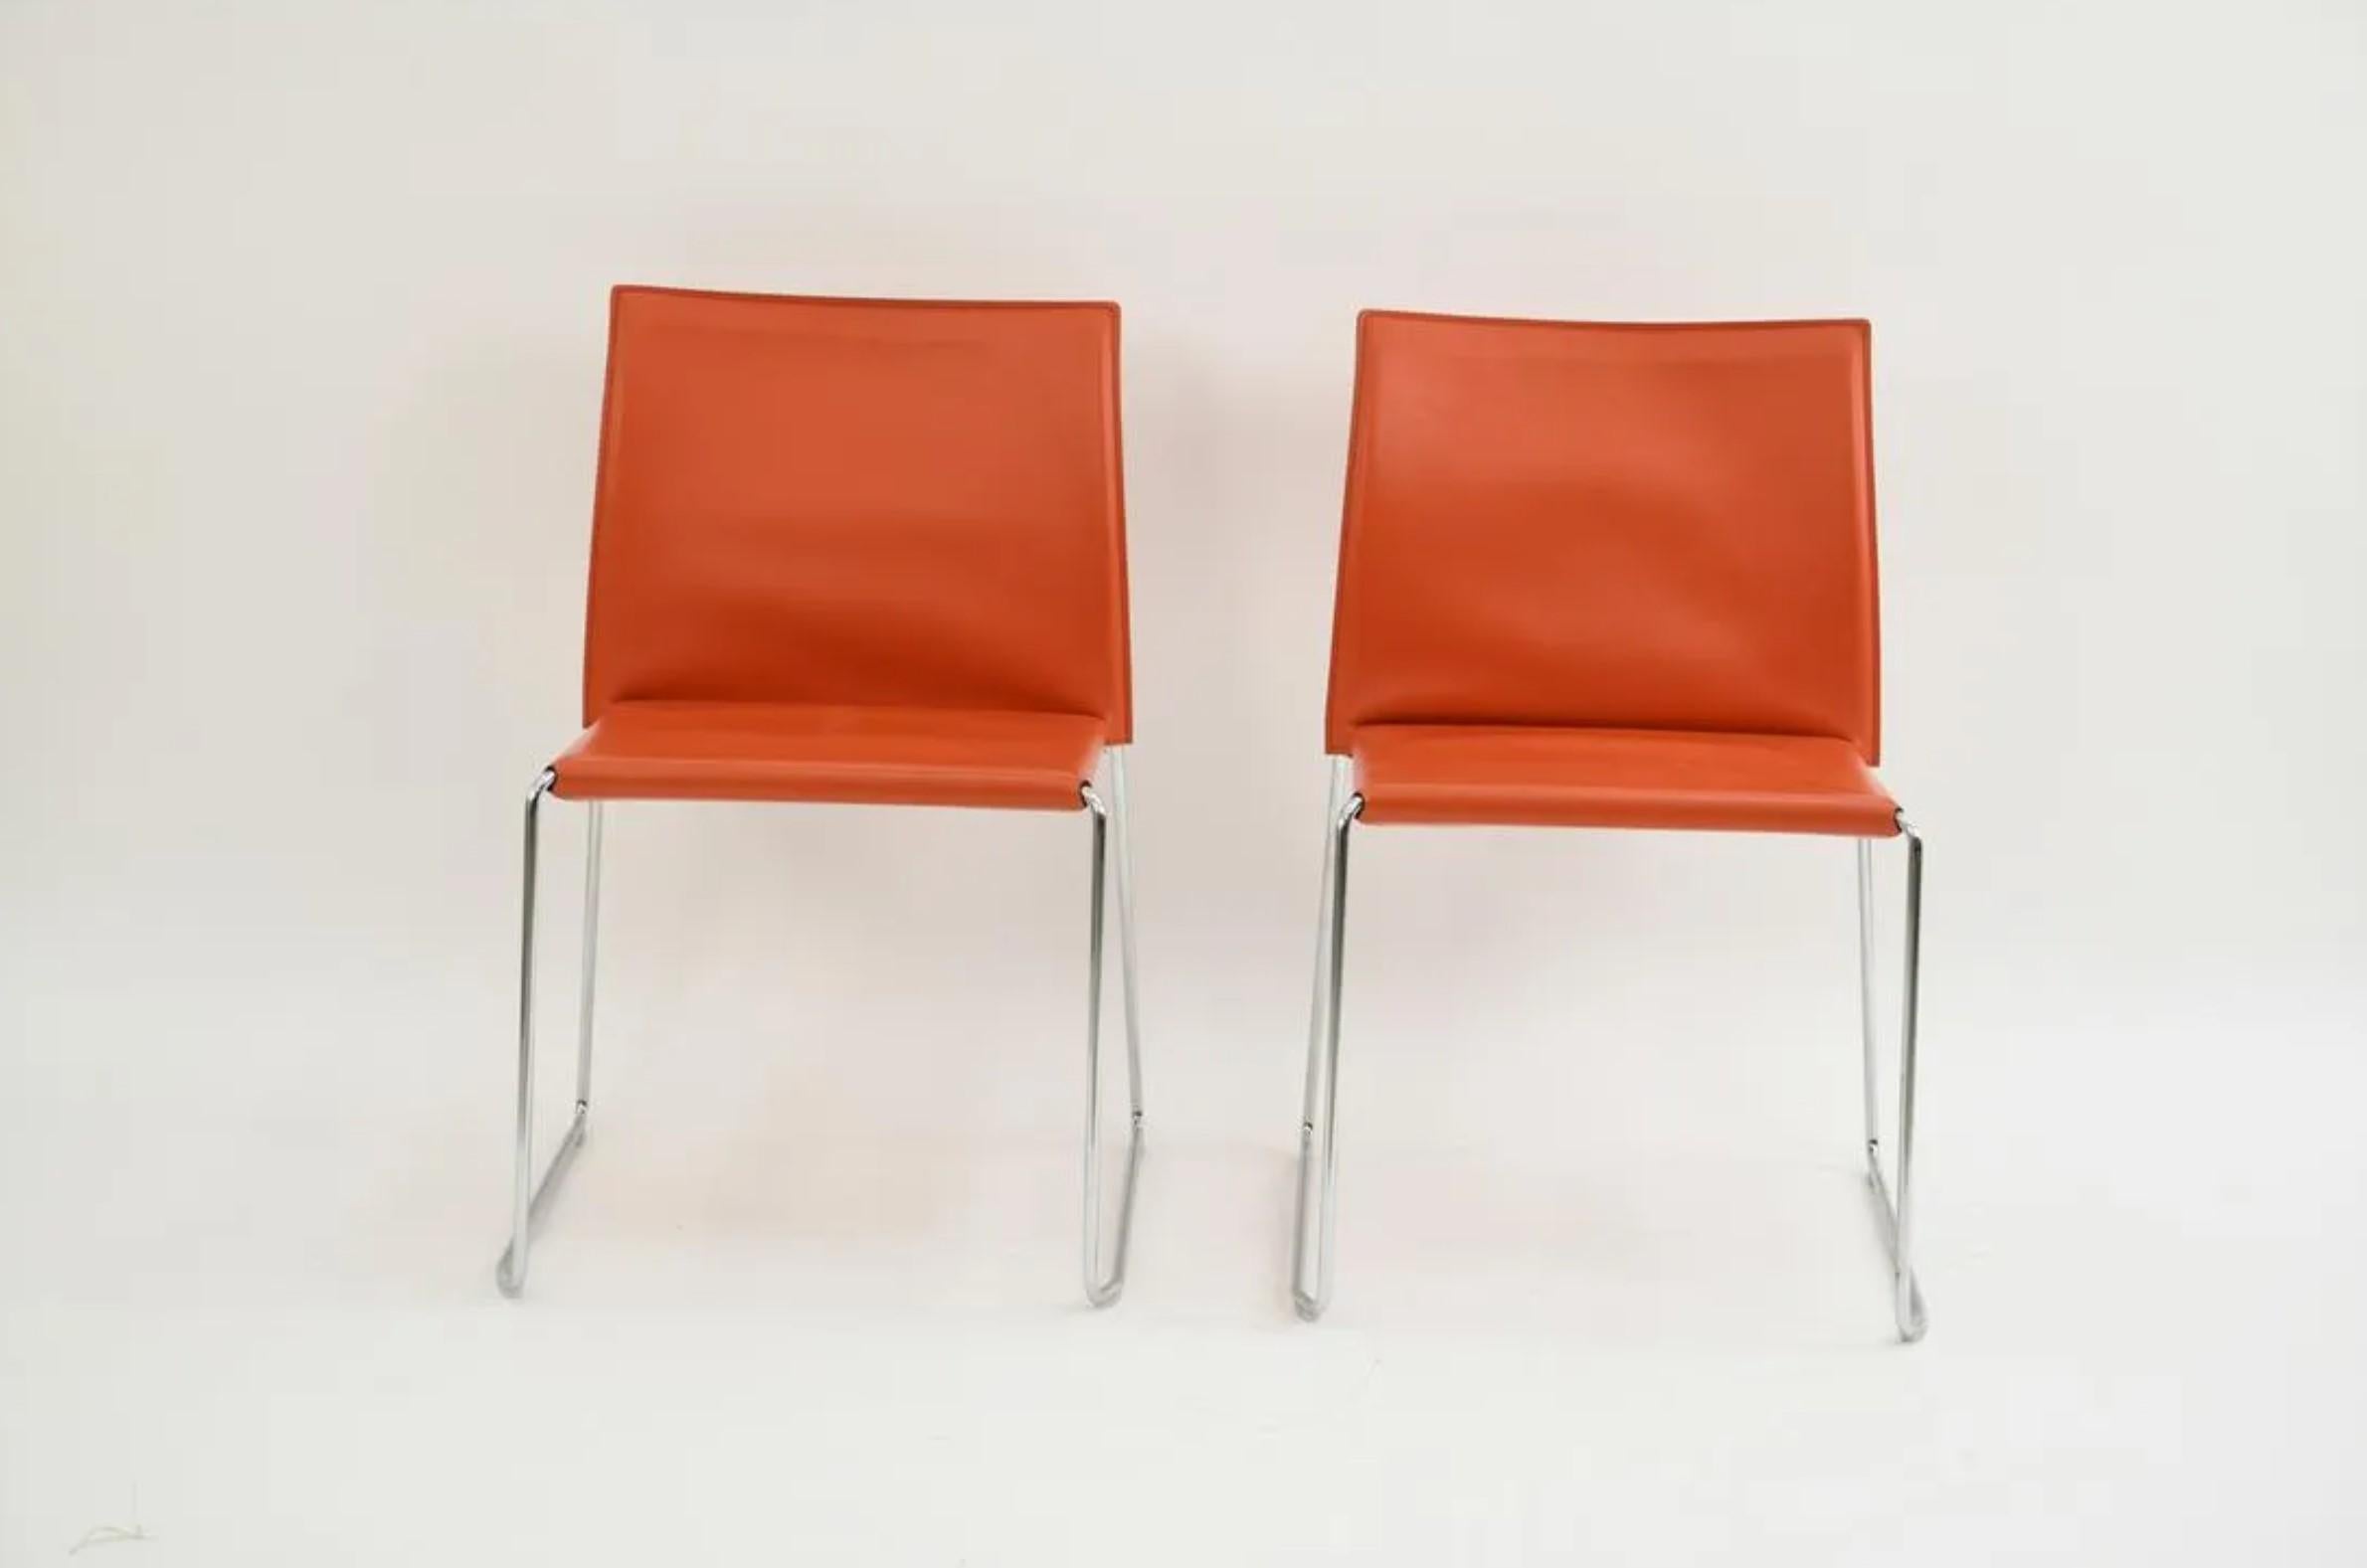 Model: Bizzy chair. A set of ten chairs by Italian designer Franco Bizzozero for Enrico Pellizzoni. With sleek and clean lines, this design features a trim chromed sled base, and finely tailored and stitched vibrant orange leather. 

Available in